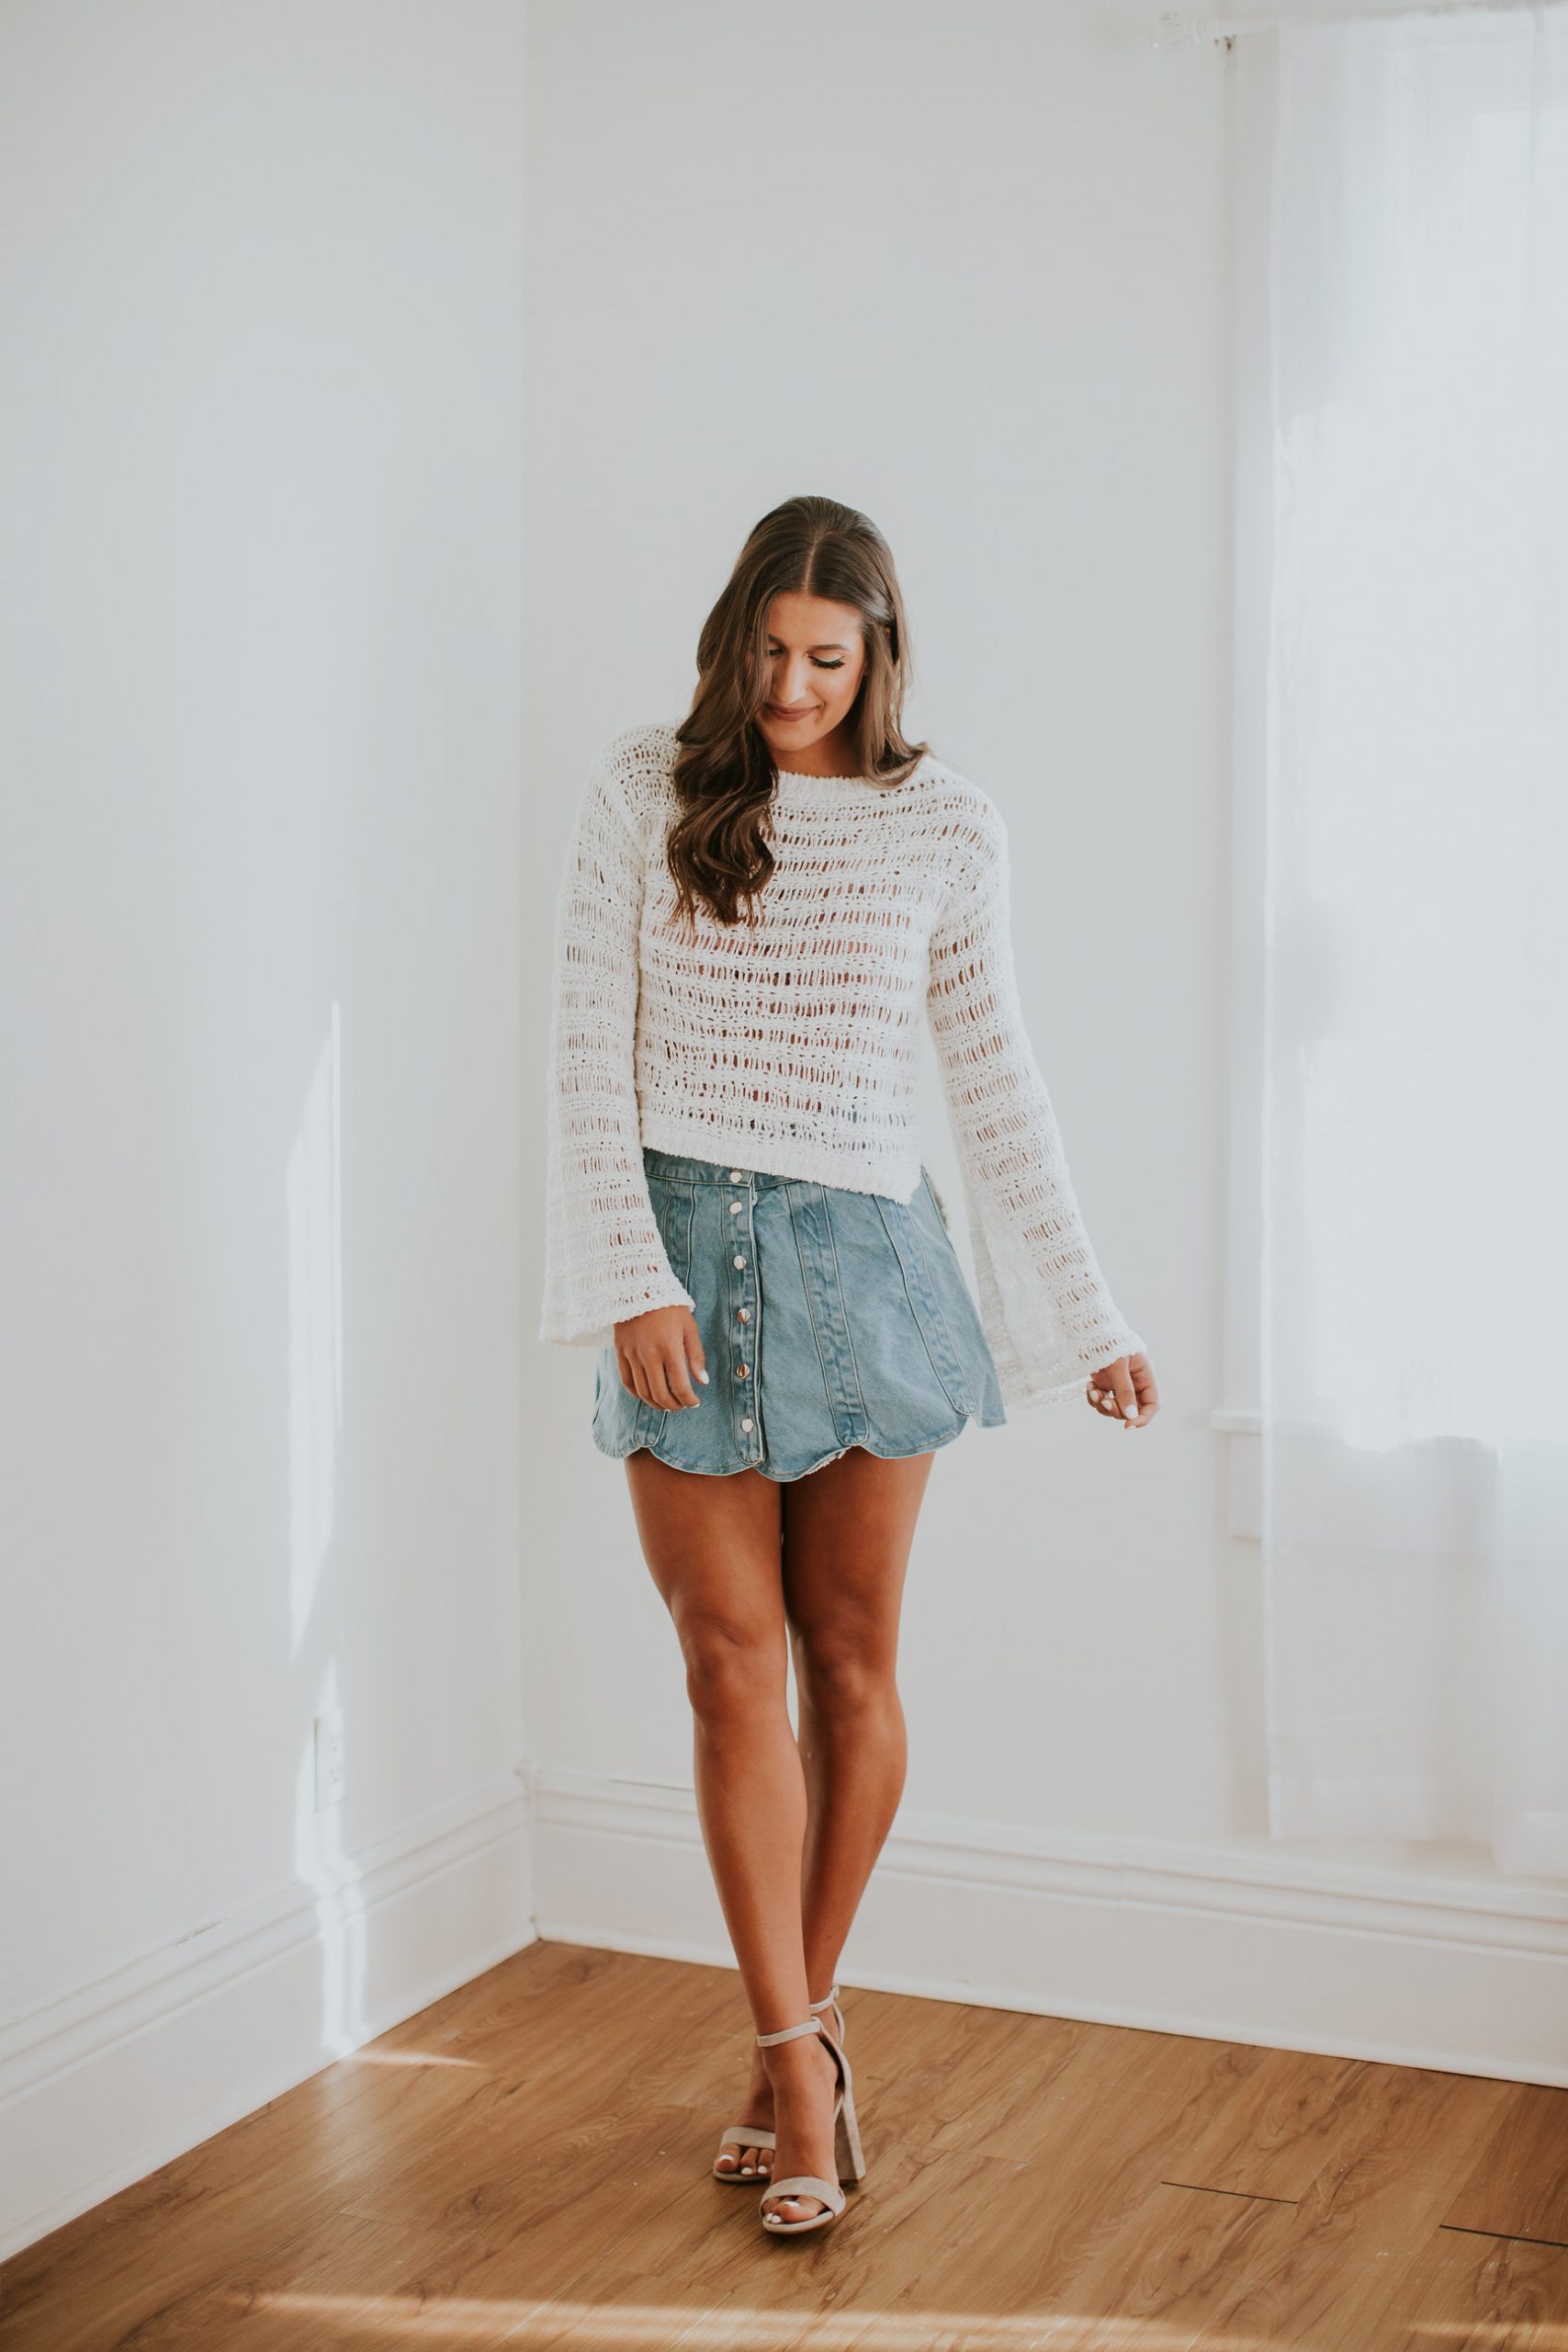 open stitch sweater, ladder stitch sweater, free people bralette, free people adella bralette, understated leather scalloped snap skirt, scallop snap skirt, denim skirt, scallop denim skirt, bell sleeve sweater, steve madden carrson sandal, spring fashion, spring outfits, spring outfit ideas, spring style // grace wainwright a southern drawl